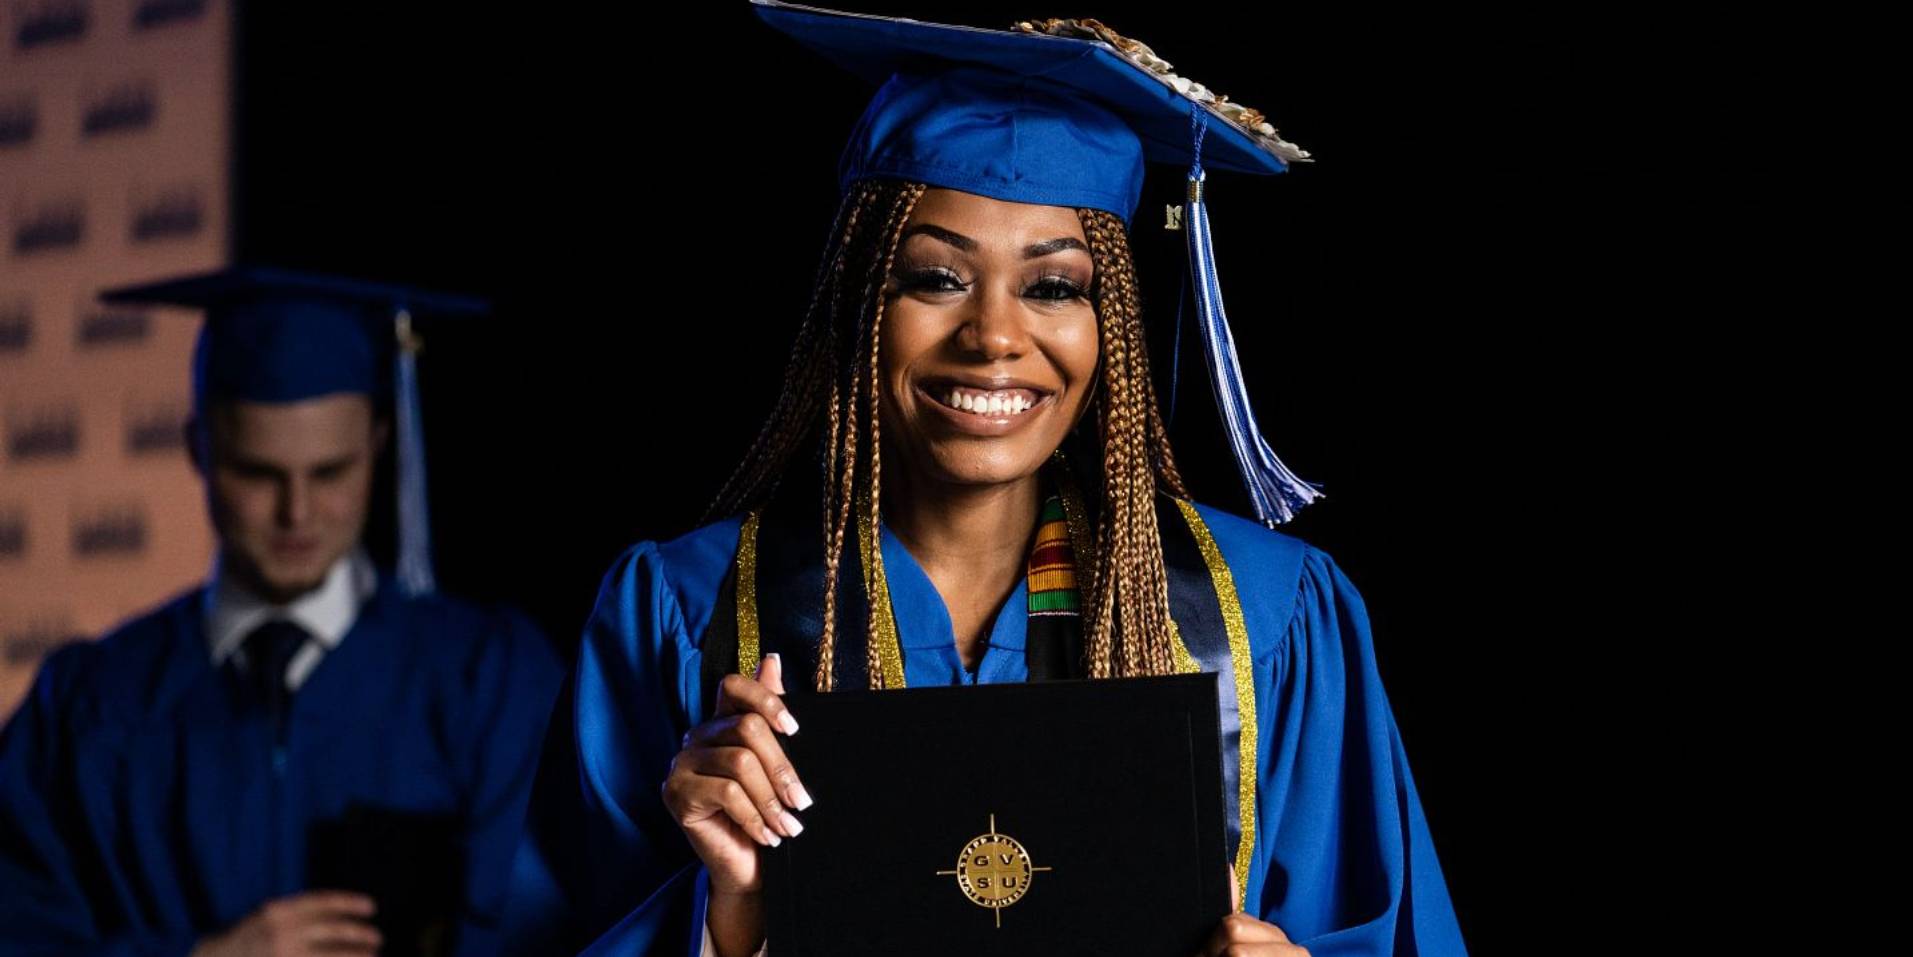 Woman smiling during graduation with diploma in hand